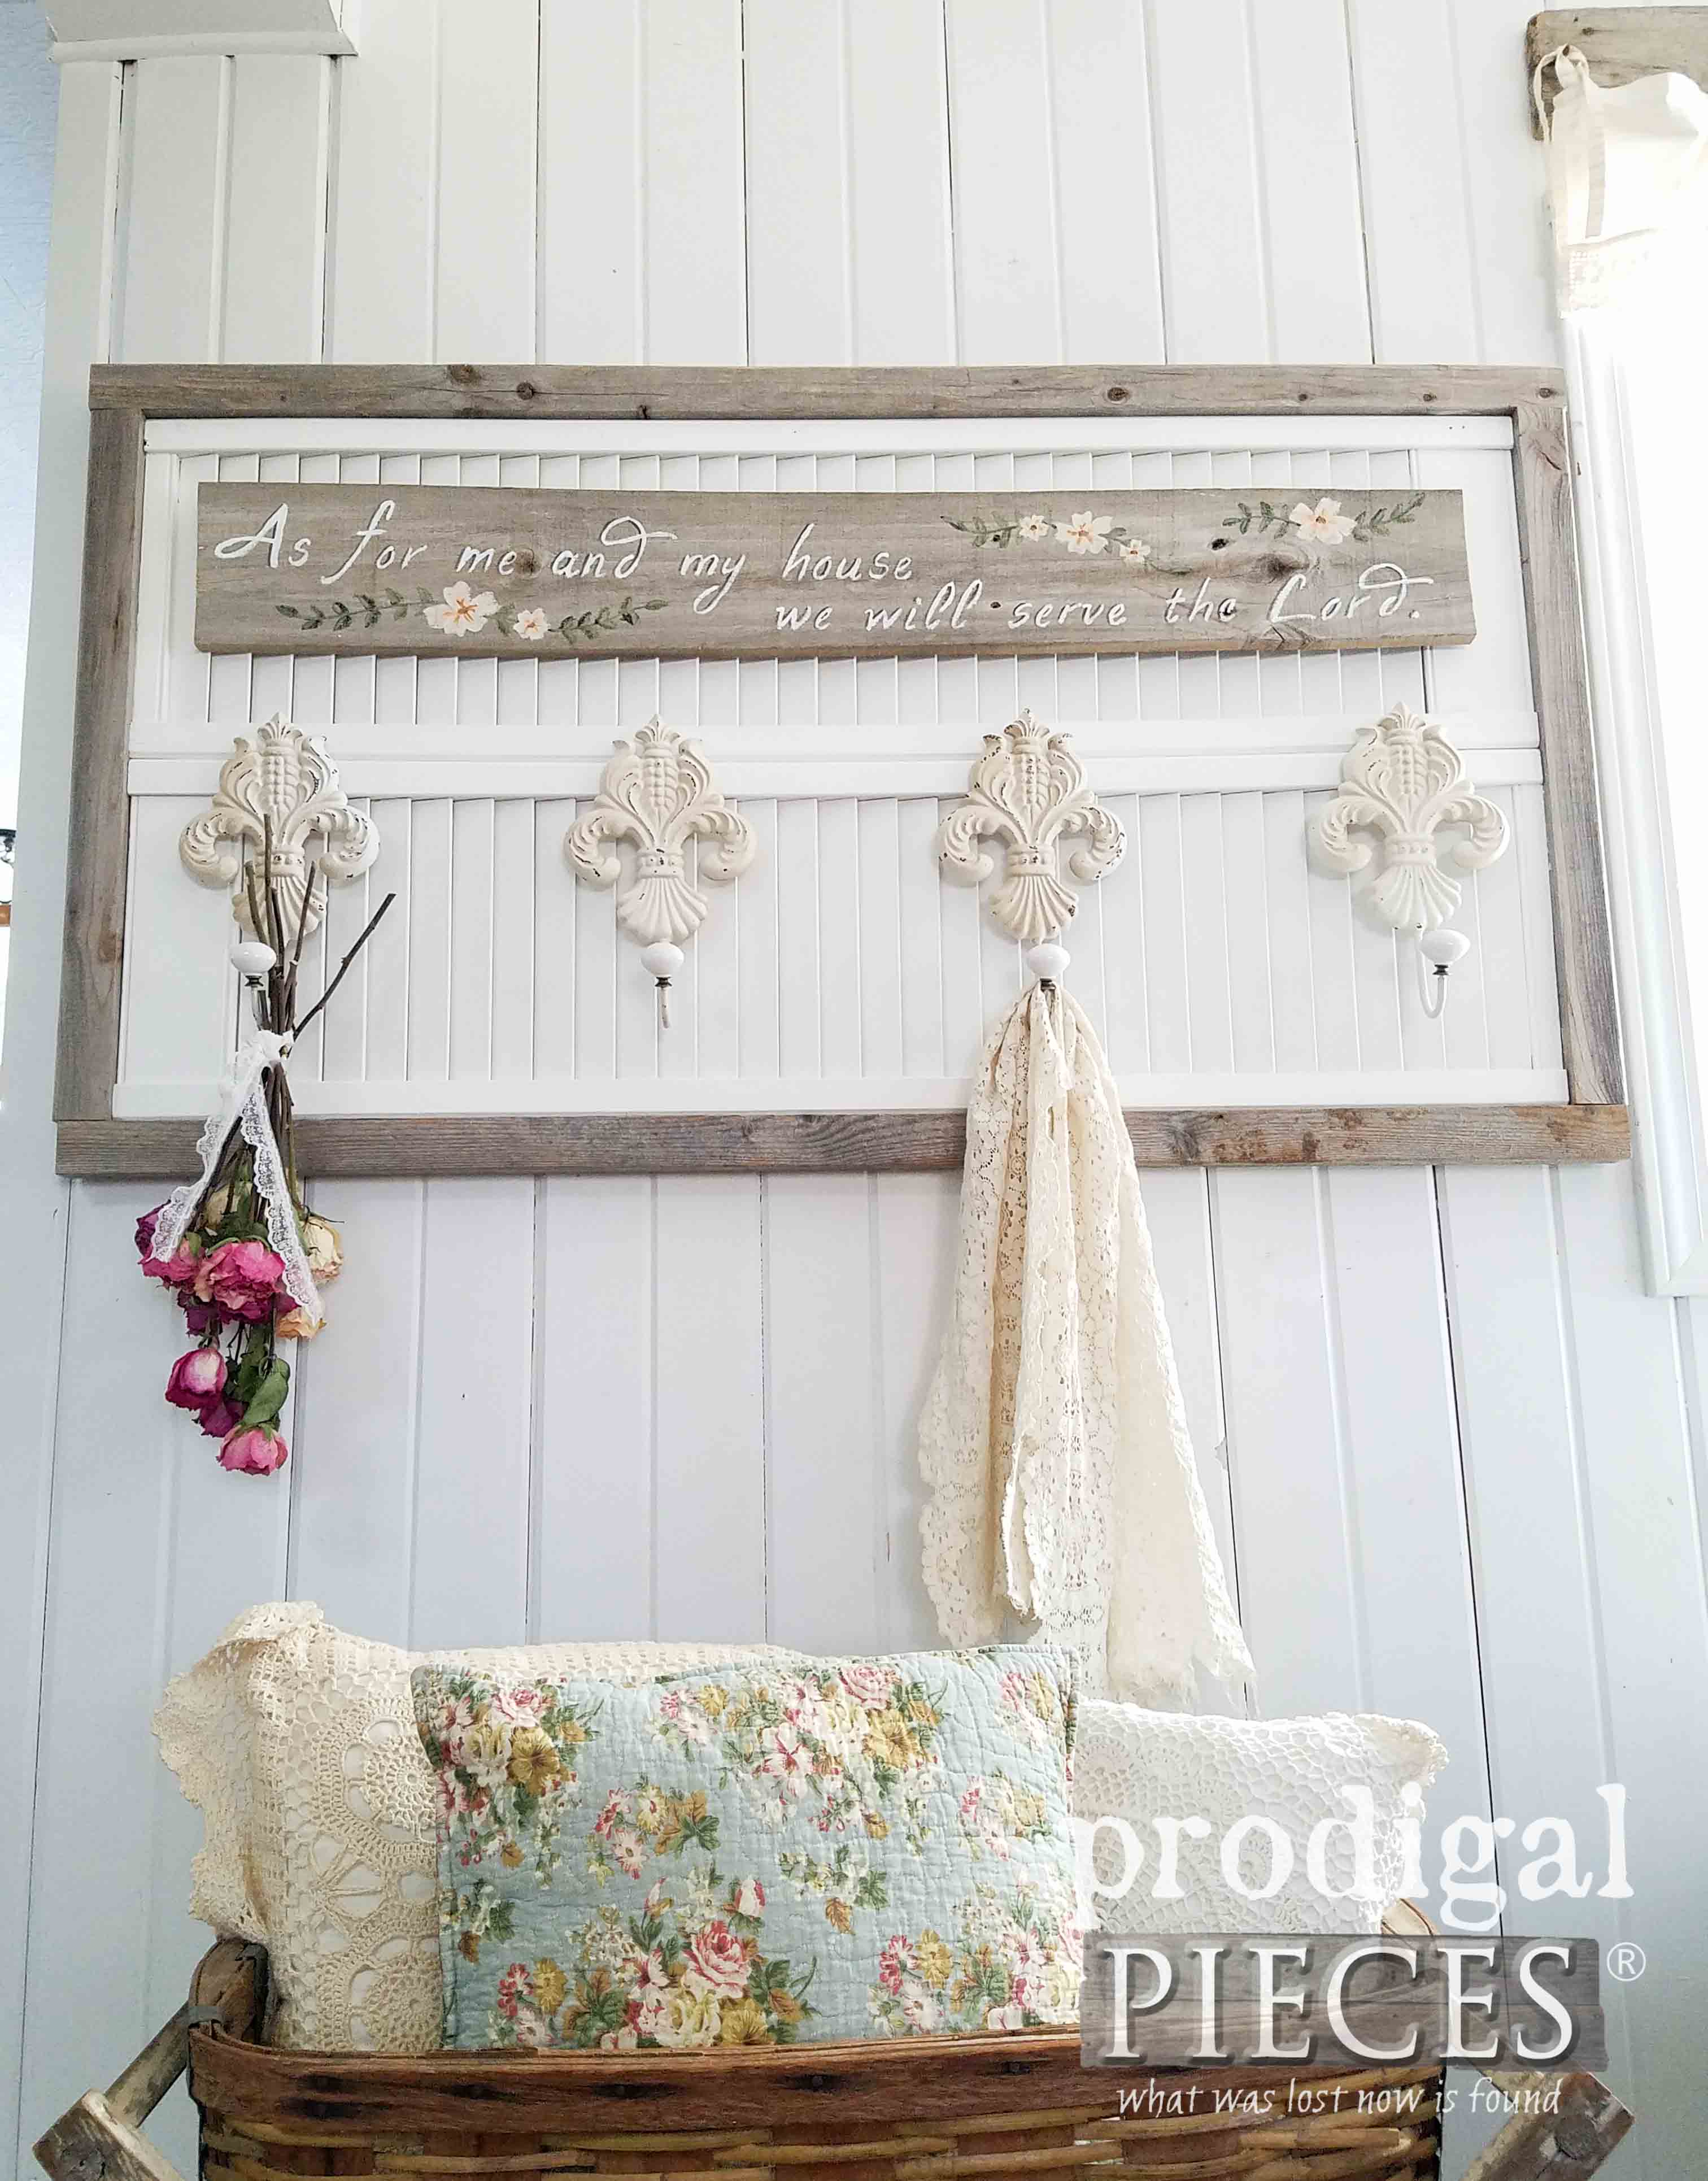 Farmhouse Chic Coat or Towel Rack Made with Reclaimed Wood by Larissa of Prodigal Pieces | prodigalpieces.com